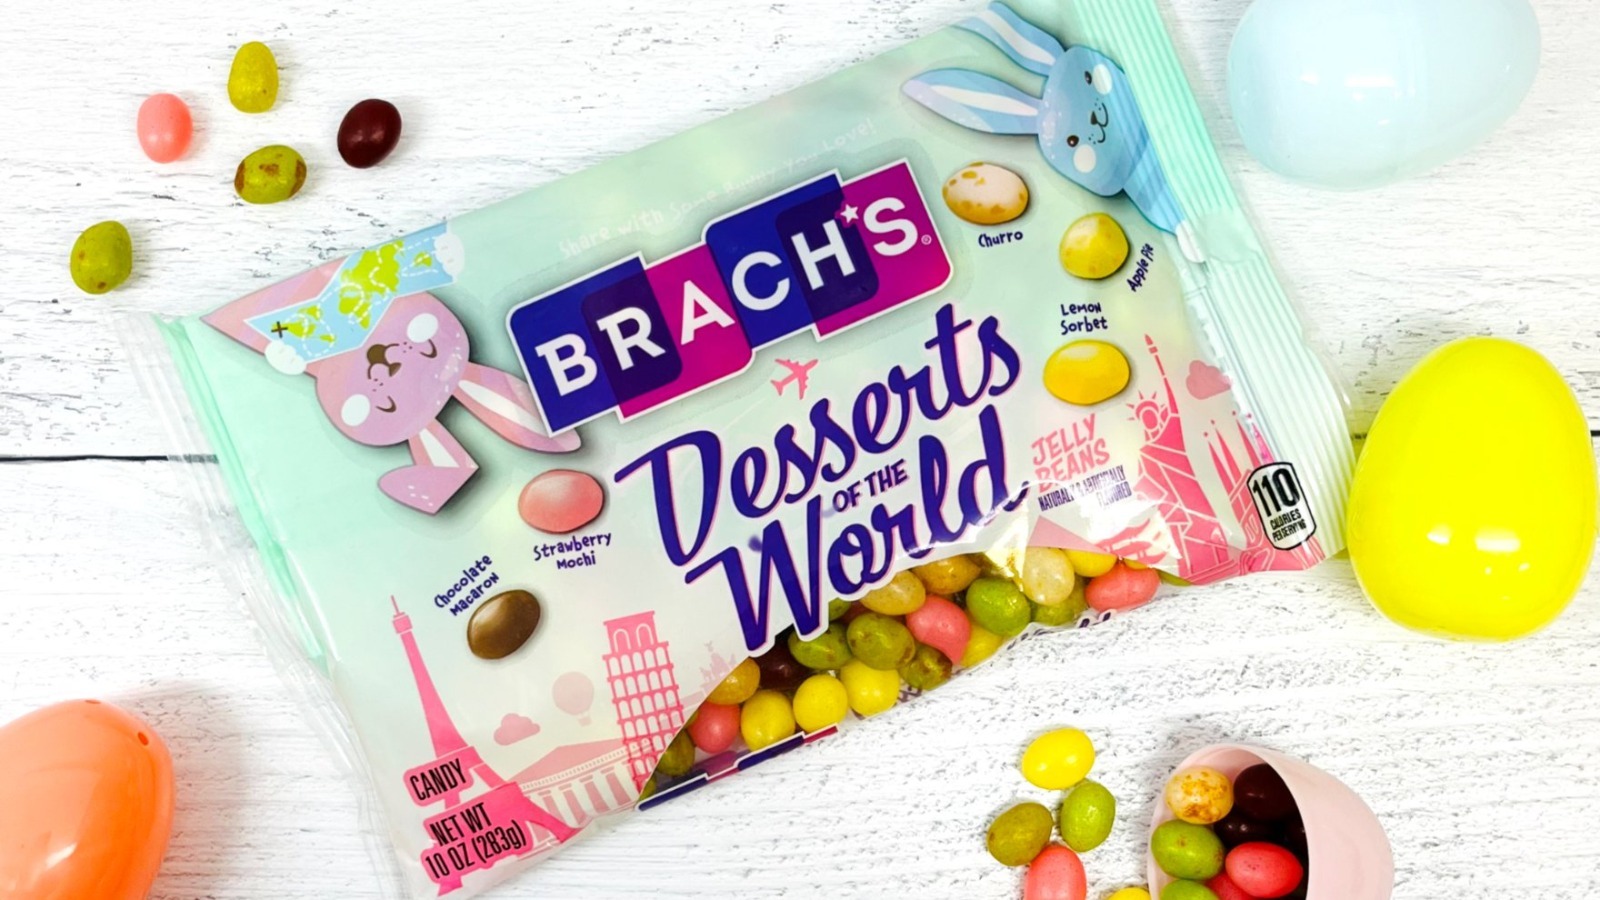 https://www.thedailymeal.com/img/gallery/brachs-new-global-jelly-bean-flavors-will-inspire-your-wanderlust/l-intro-1677693482.jpg